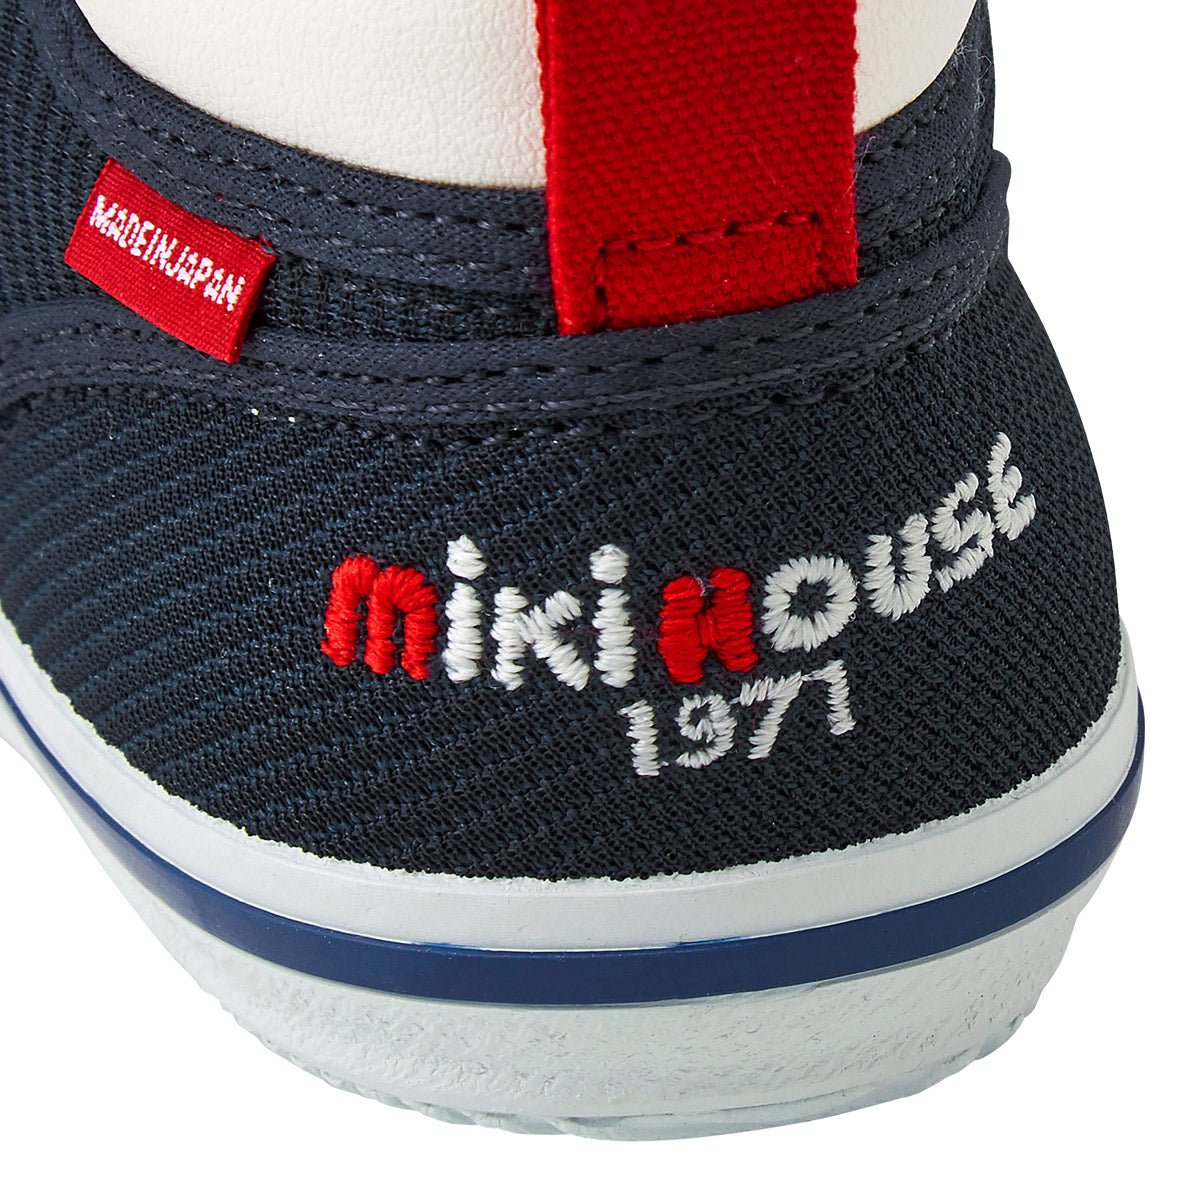 My Second Shoes - Classic - MIKI HOUSE USA